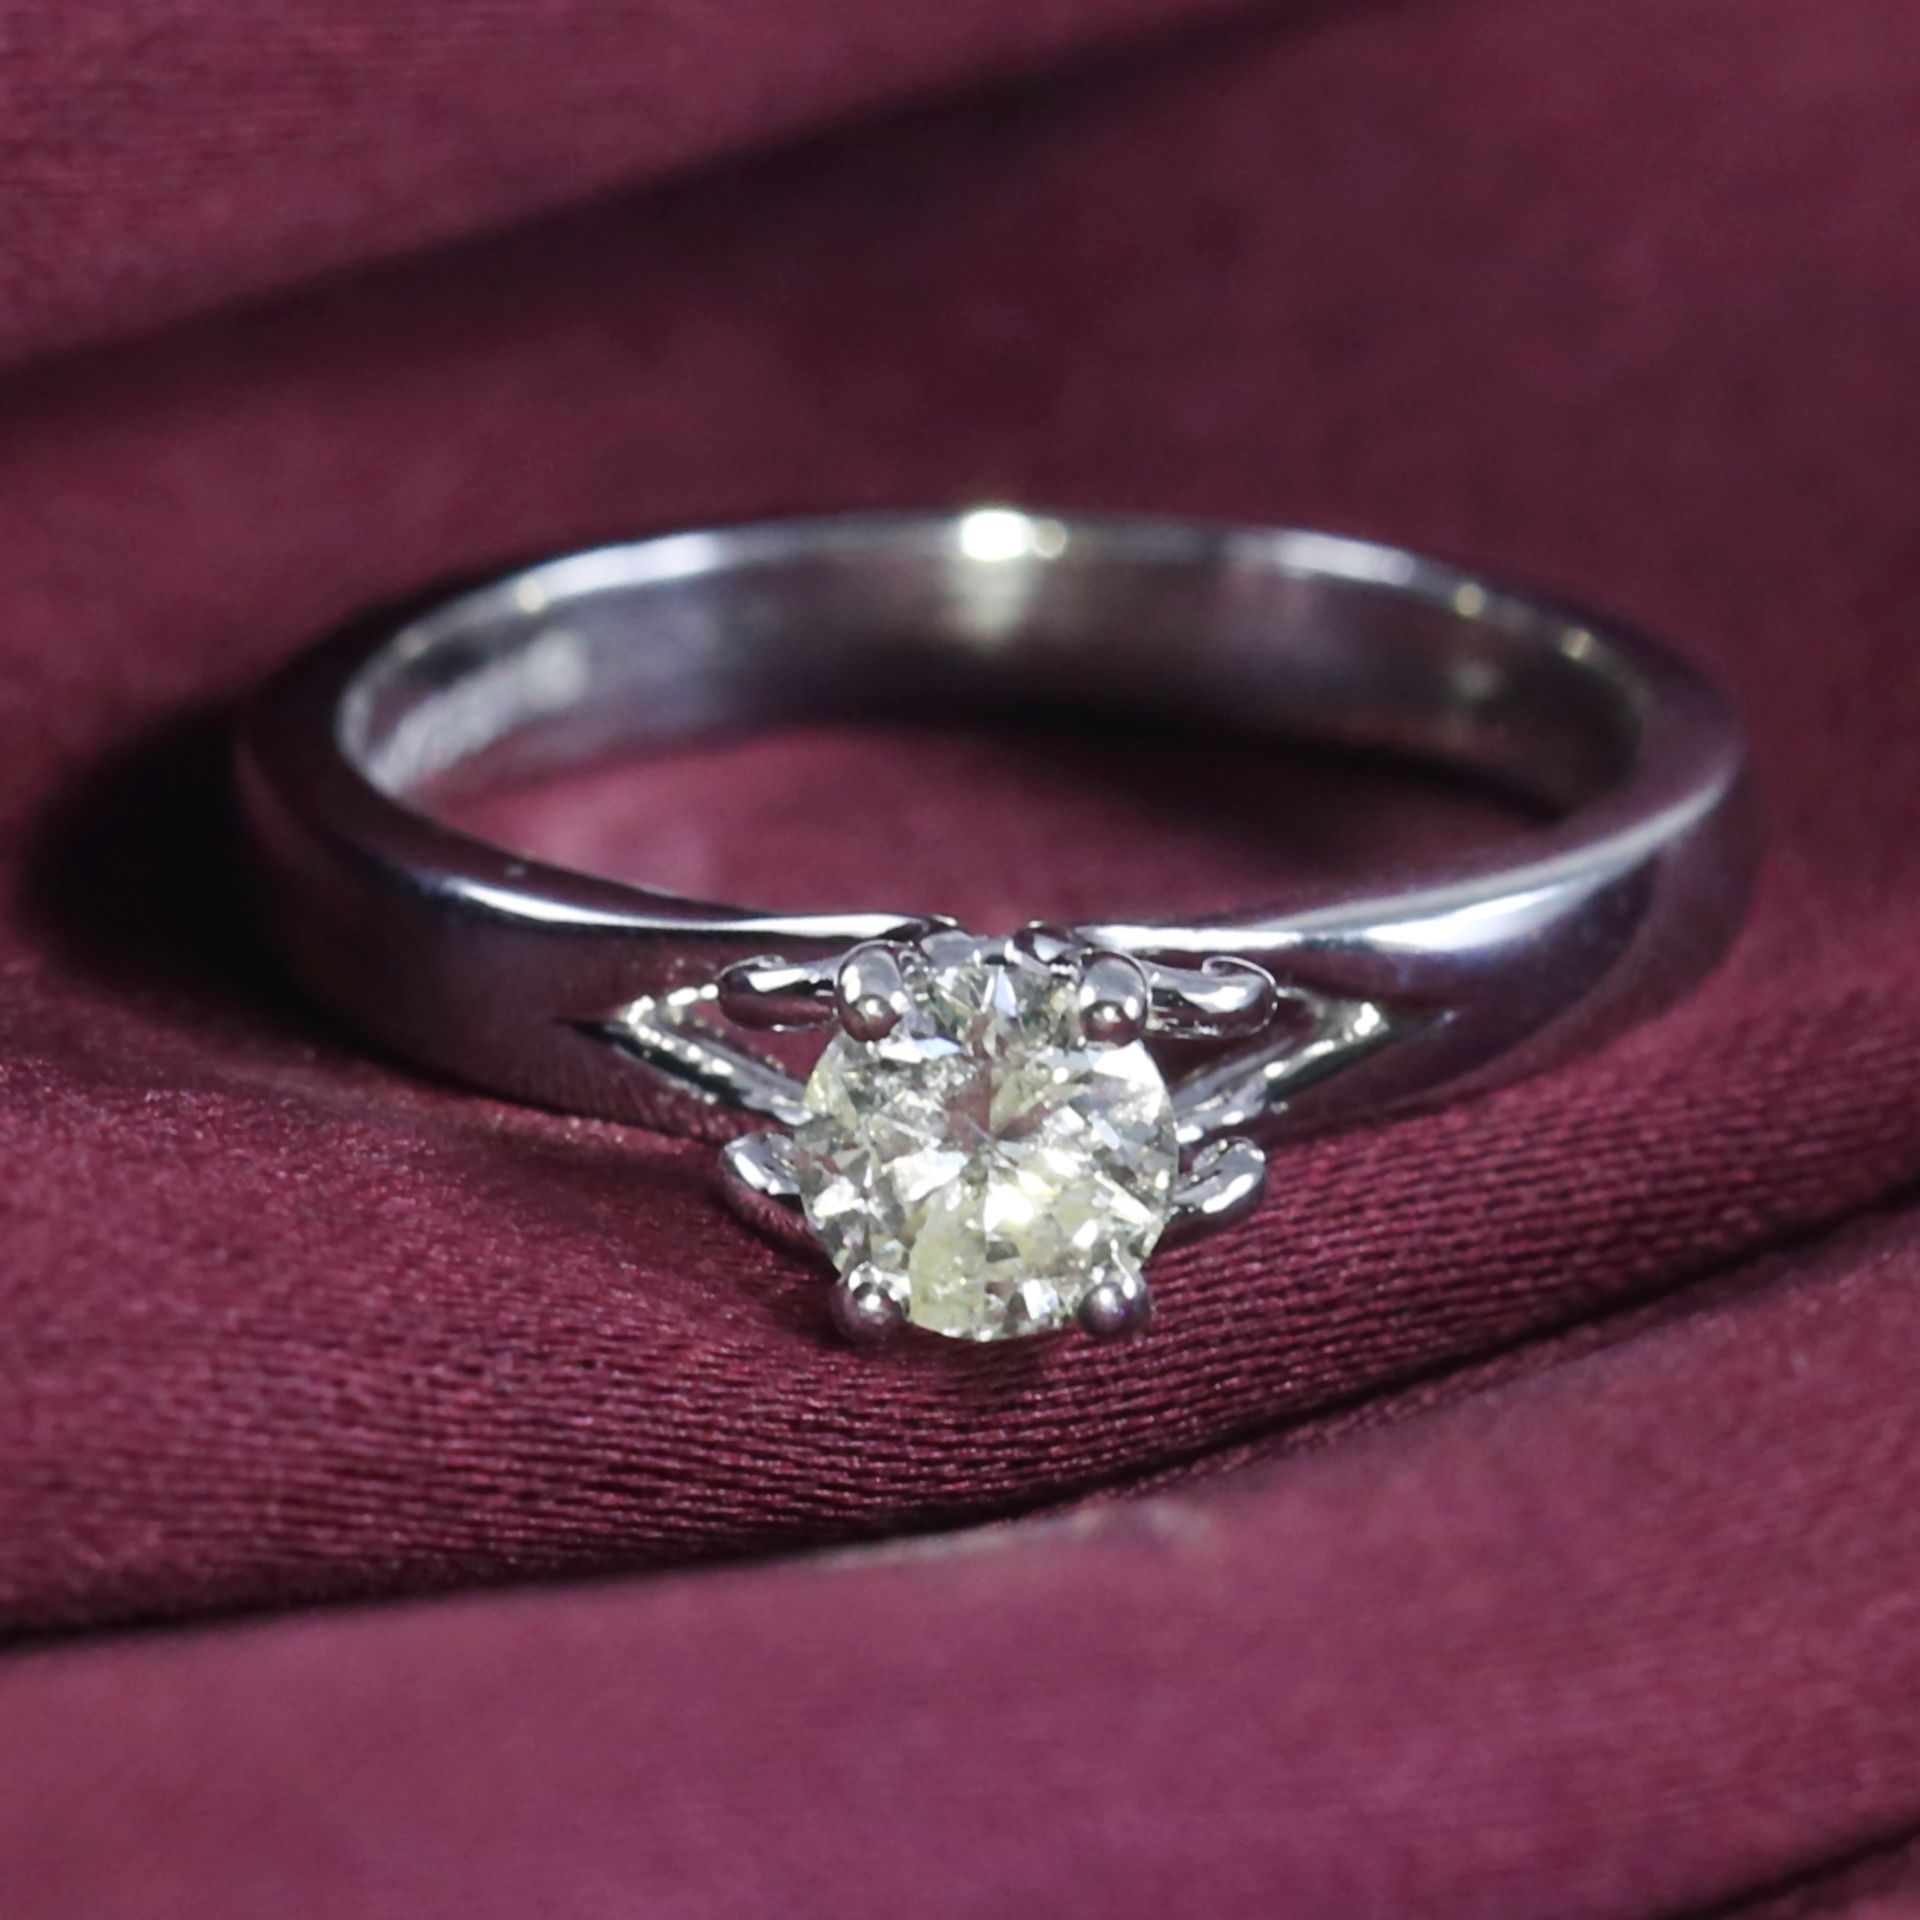 14 K White Gold Certified Solitaire Diamond Ring - Image 5 of 7